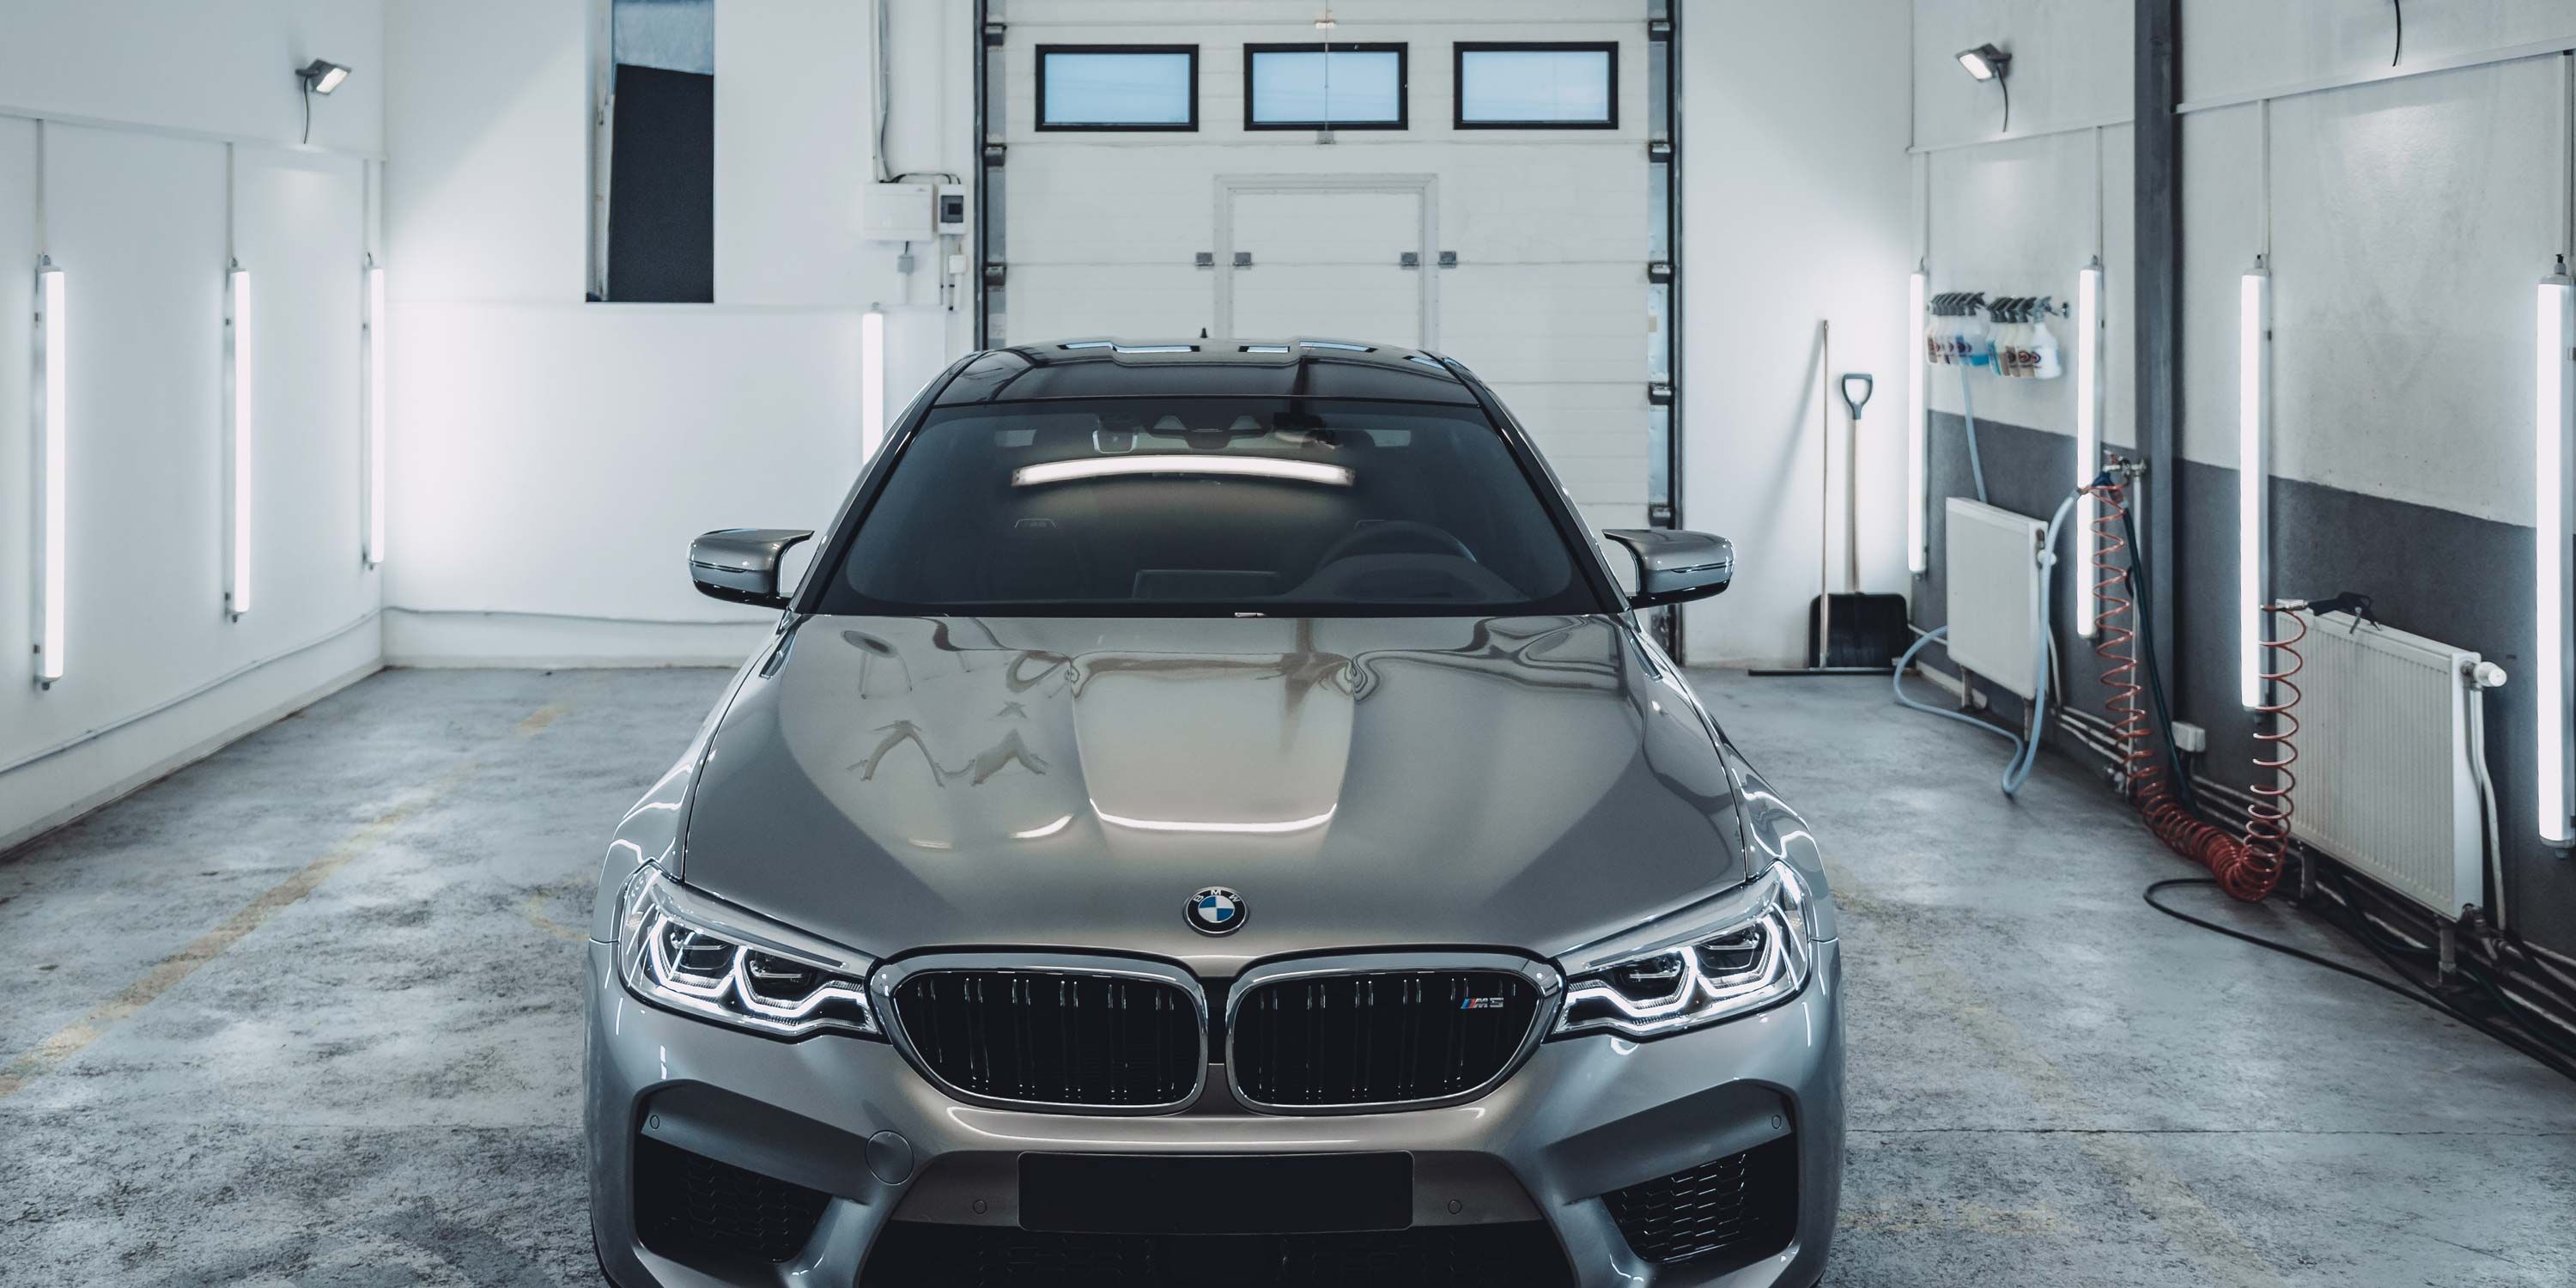 silver bmw in grey and white garage with led lighting on walls